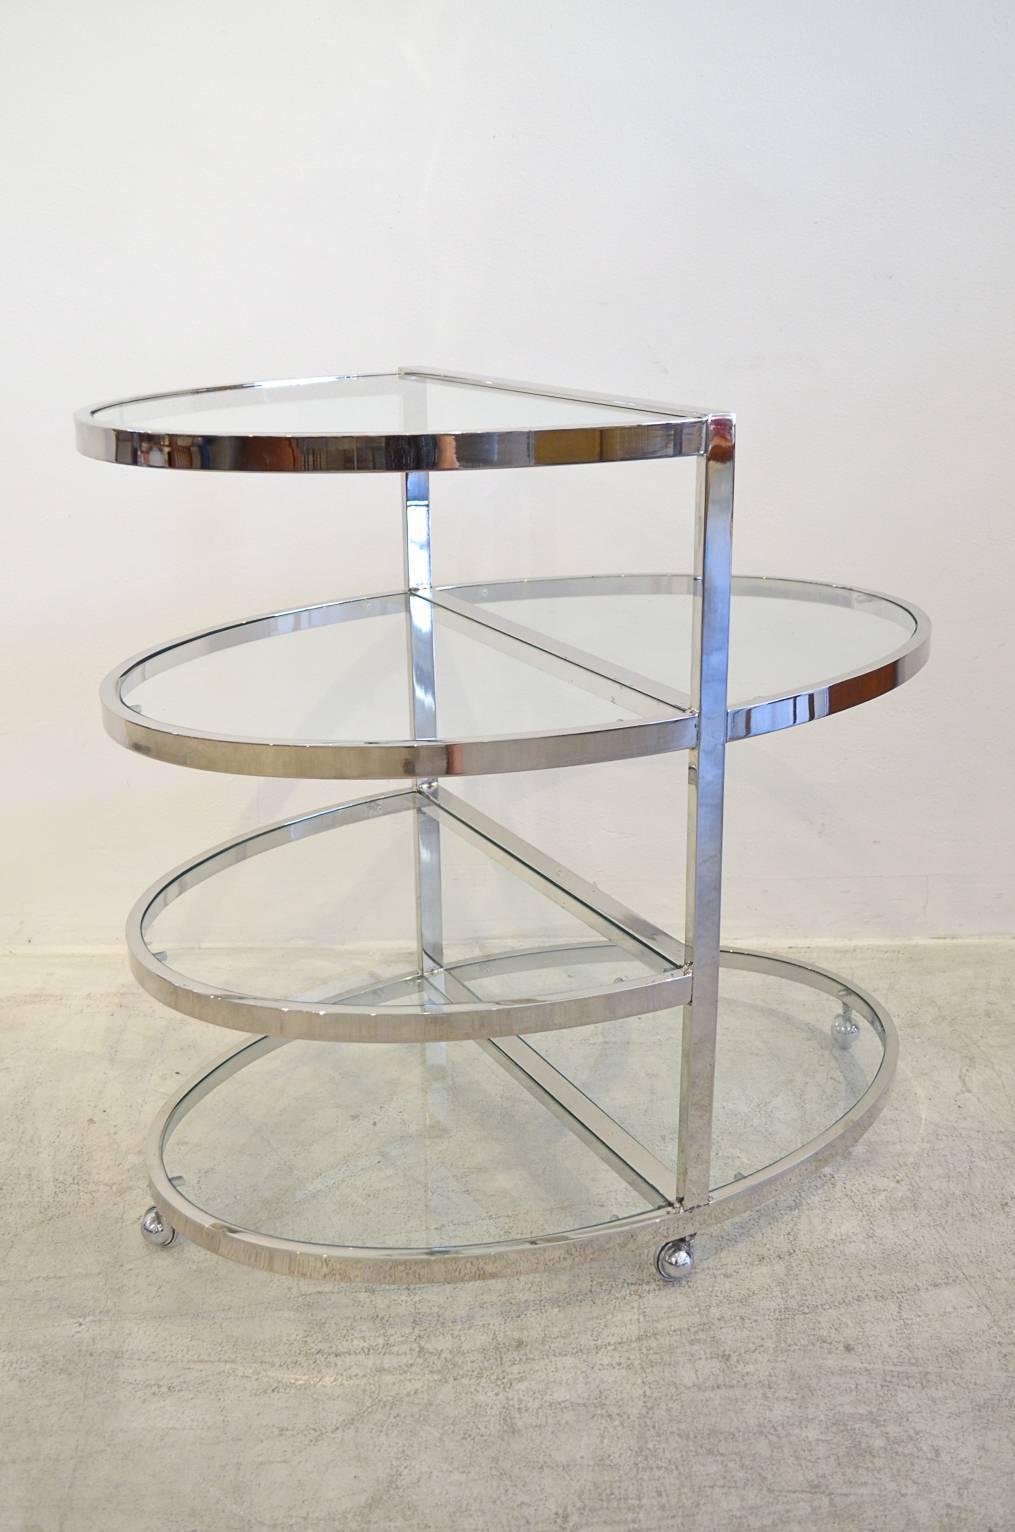 1970s chrome and glass rolling bar cart. Chrome is in good condition, glass has minor chips on two shelves, otherwise very good.

Measures: 30